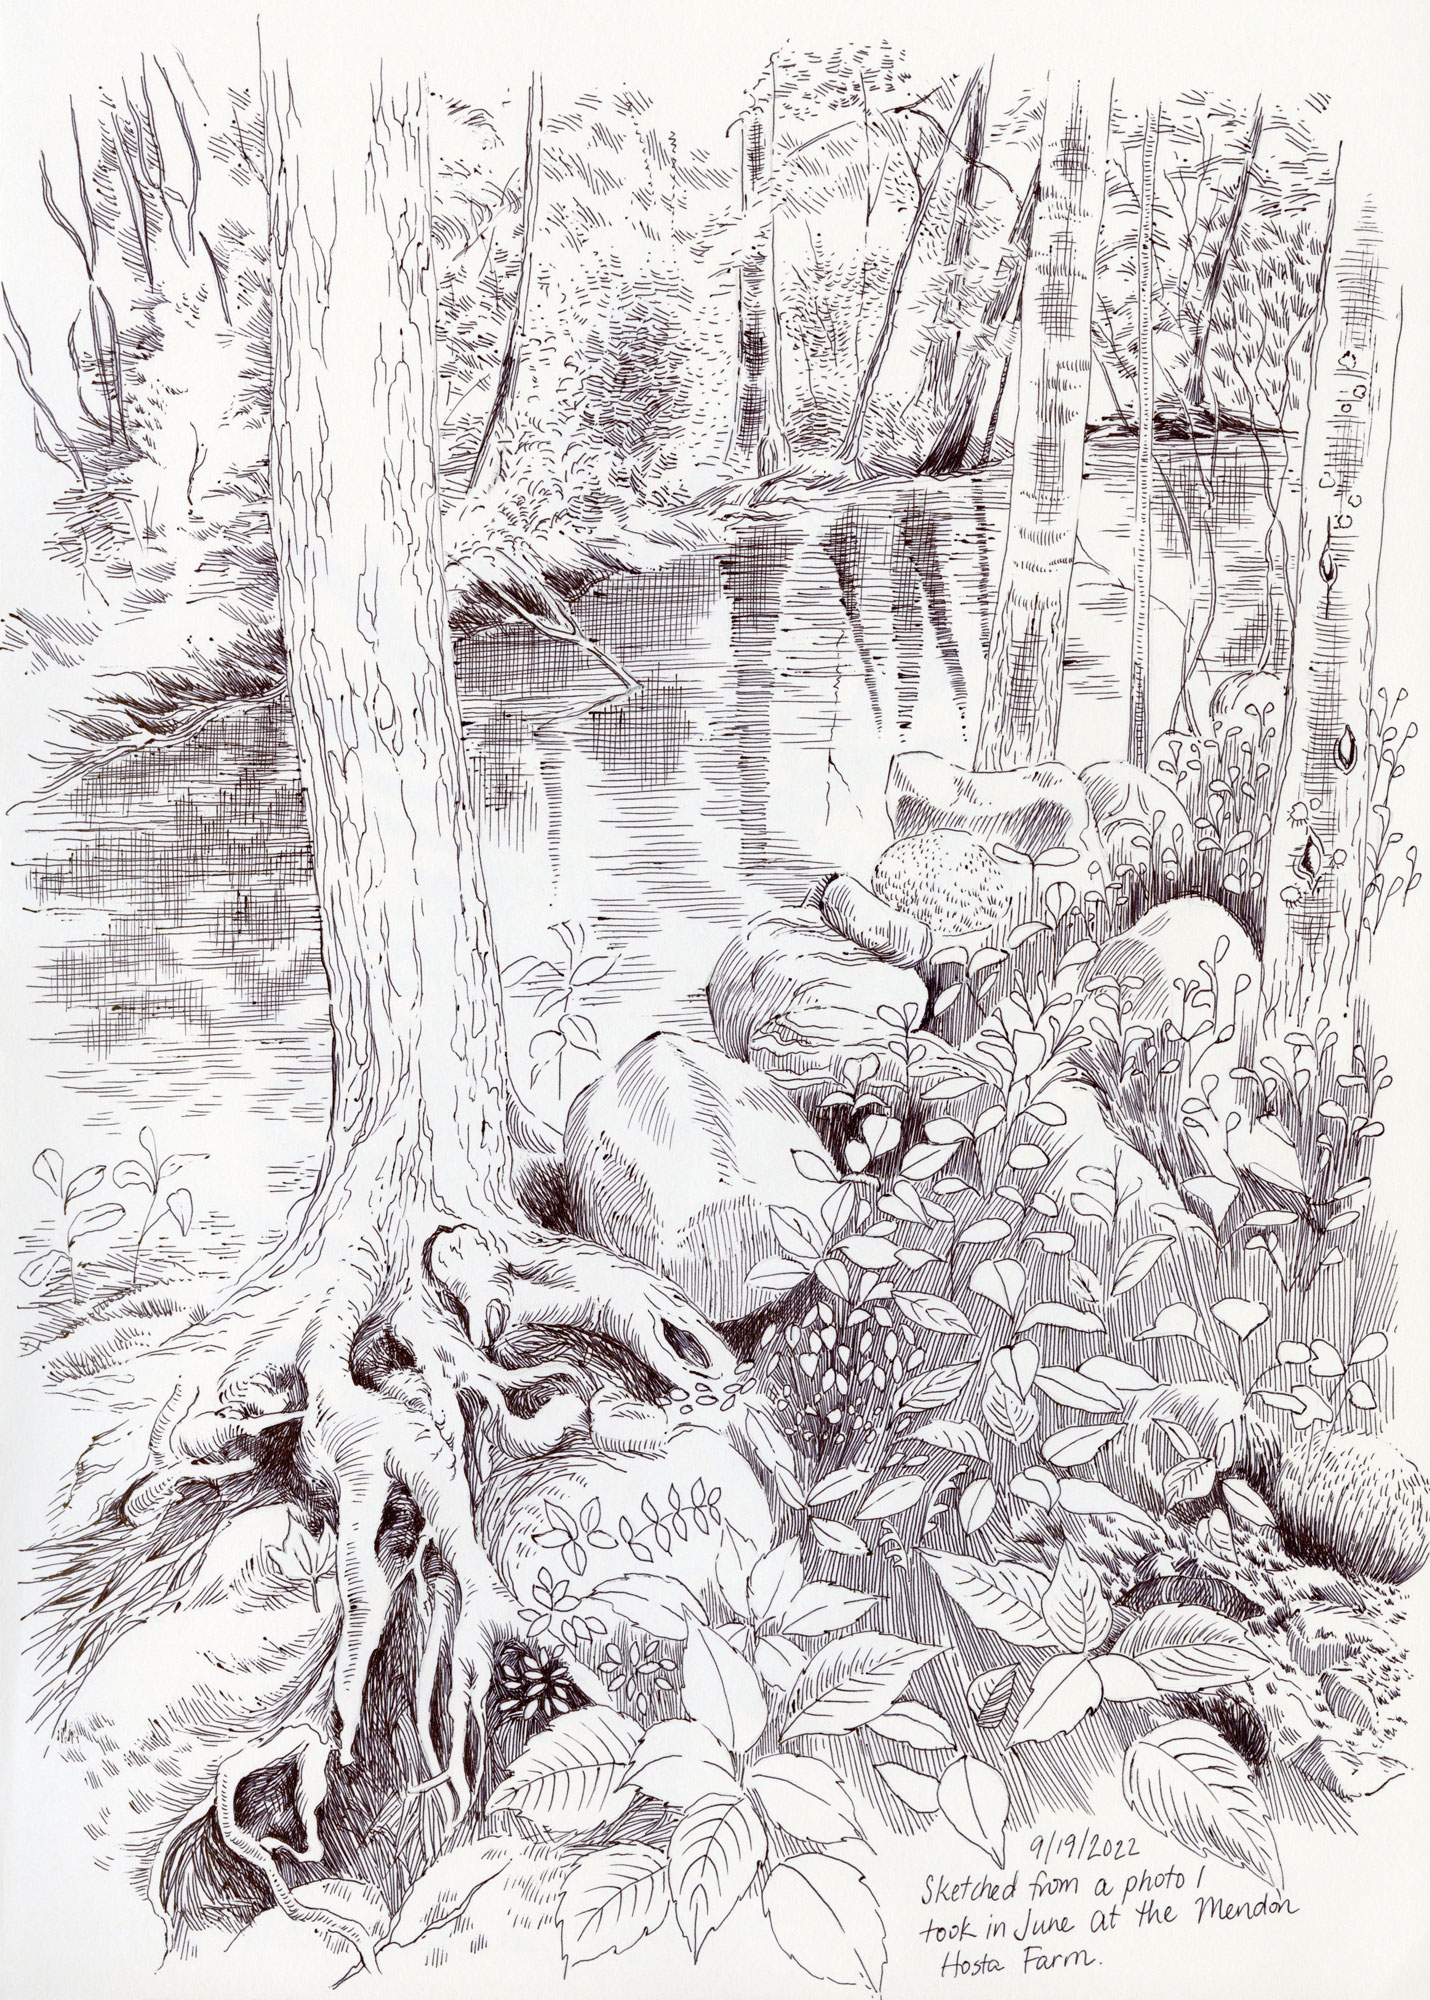 ball point pen drawing of a stream with trees